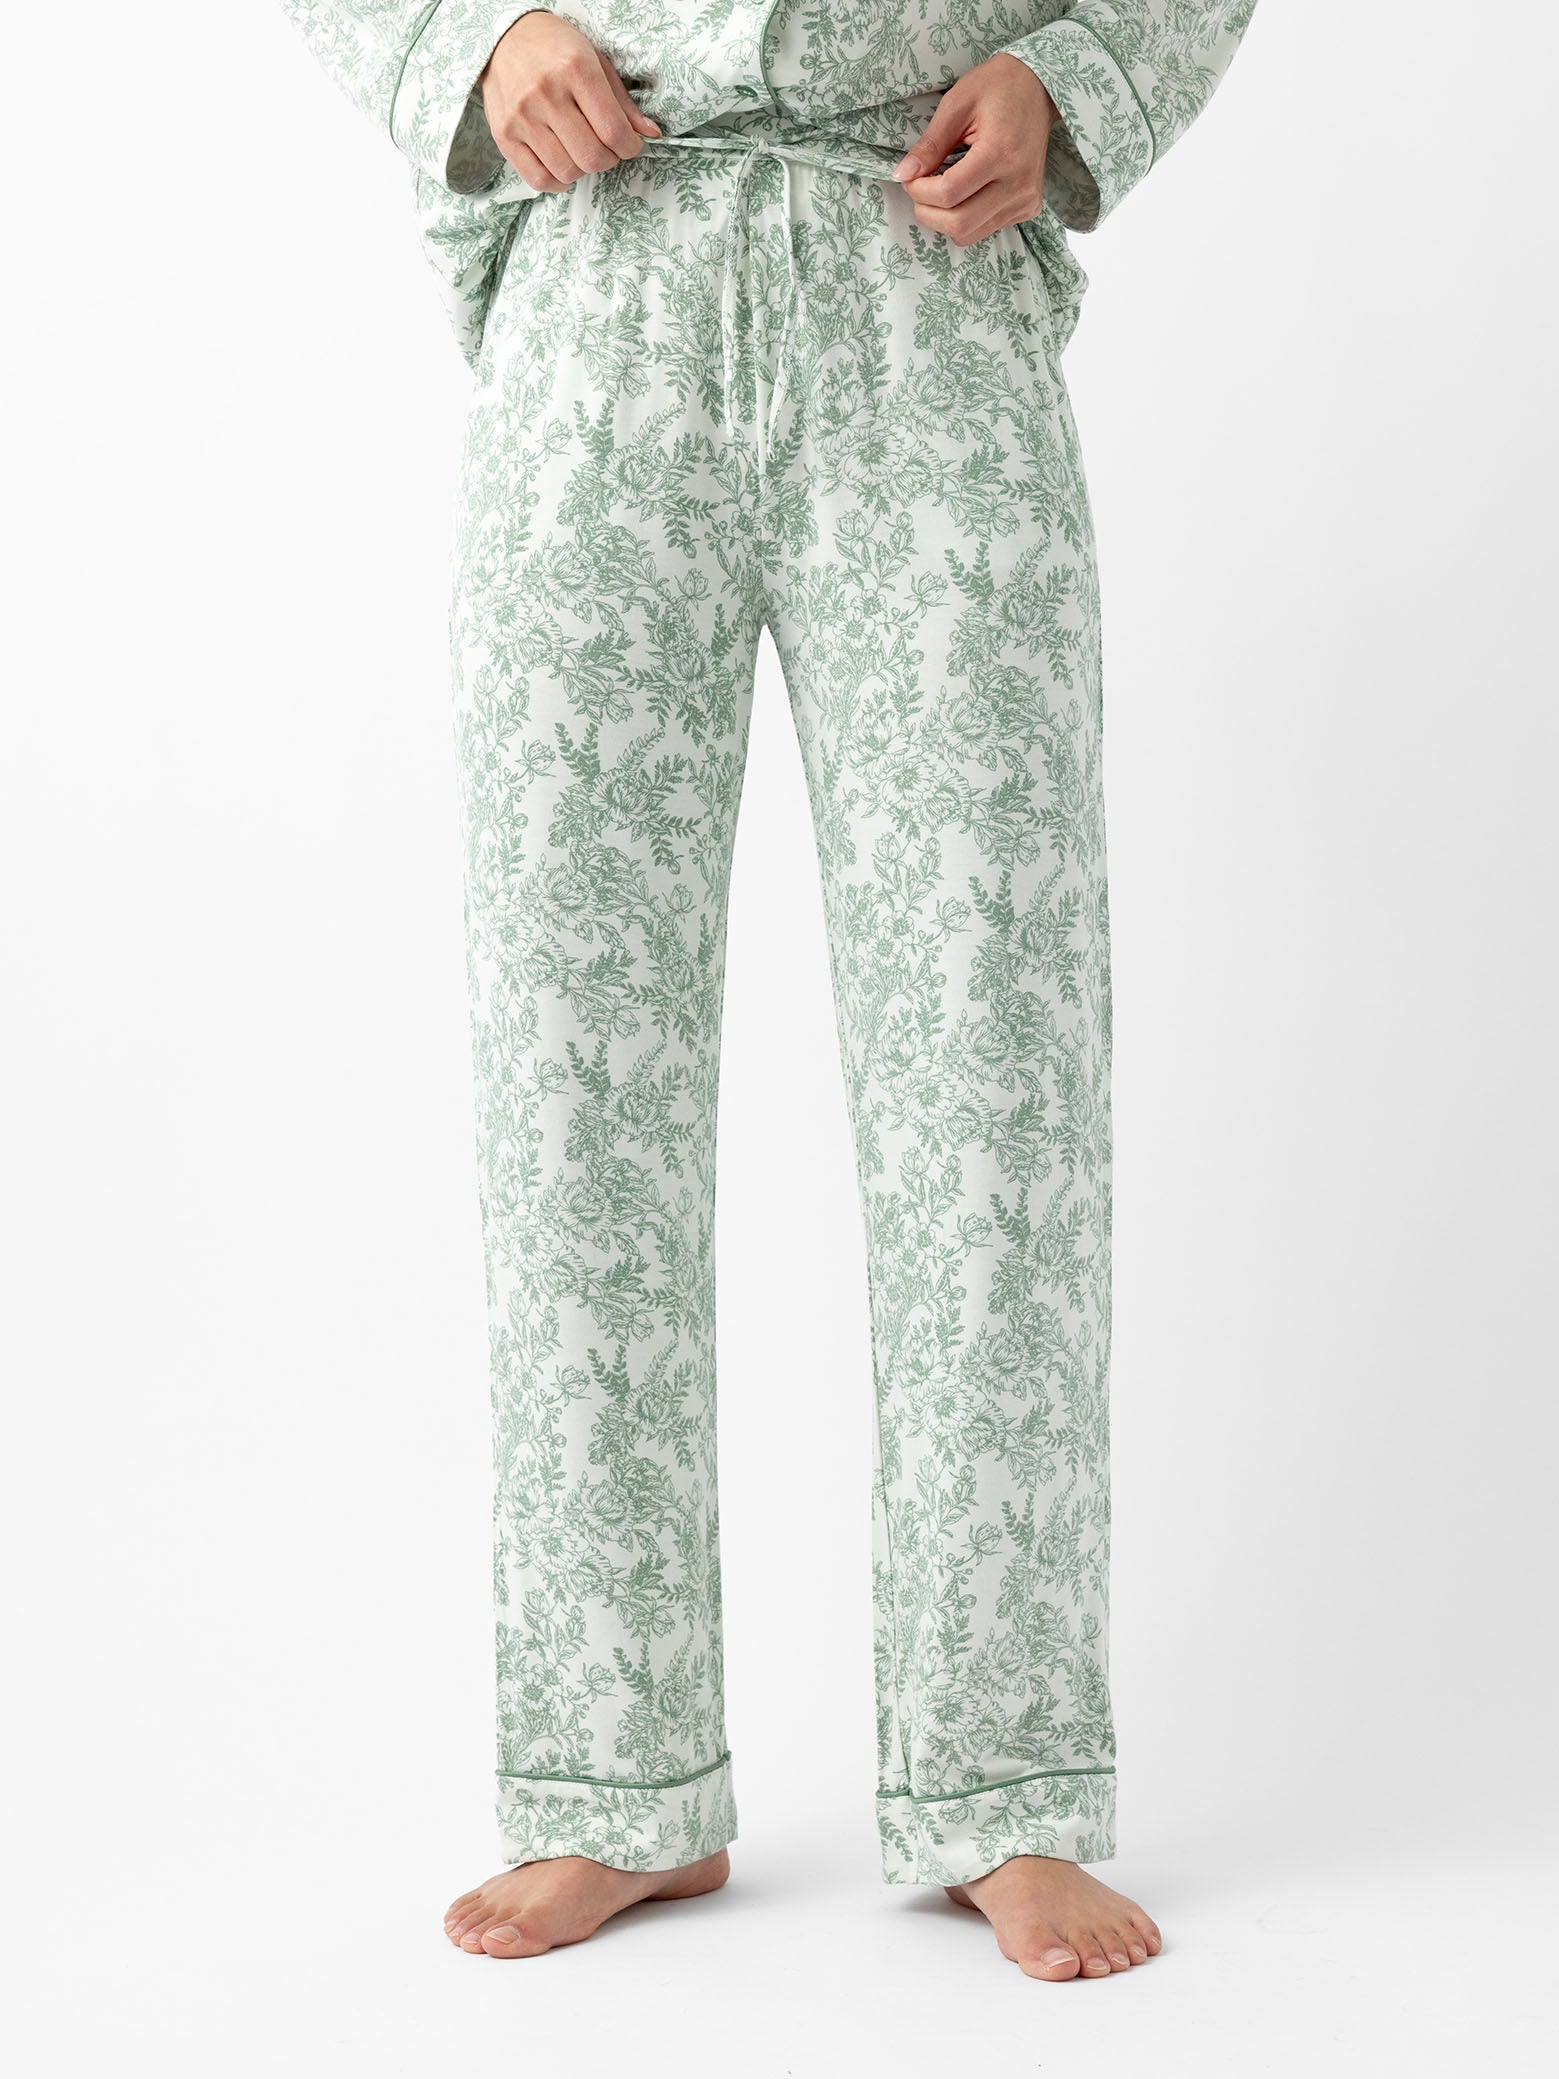 Woman in celadon toile pajama pants with white background 